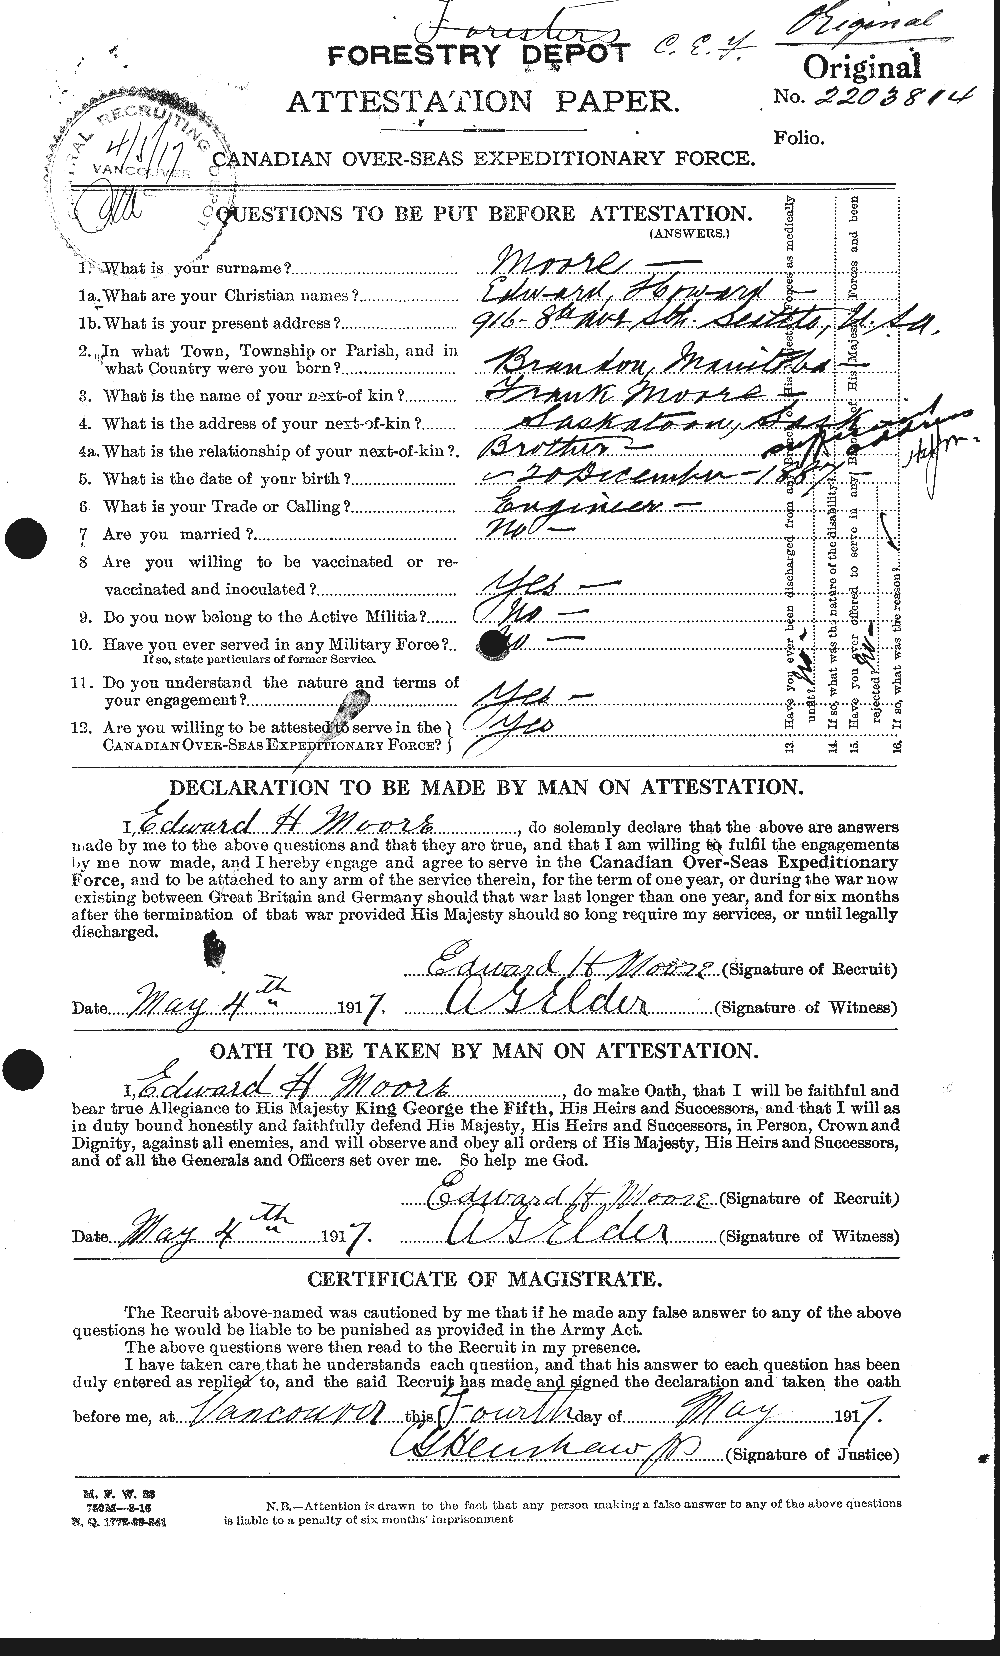 Personnel Records of the First World War - CEF 506630a